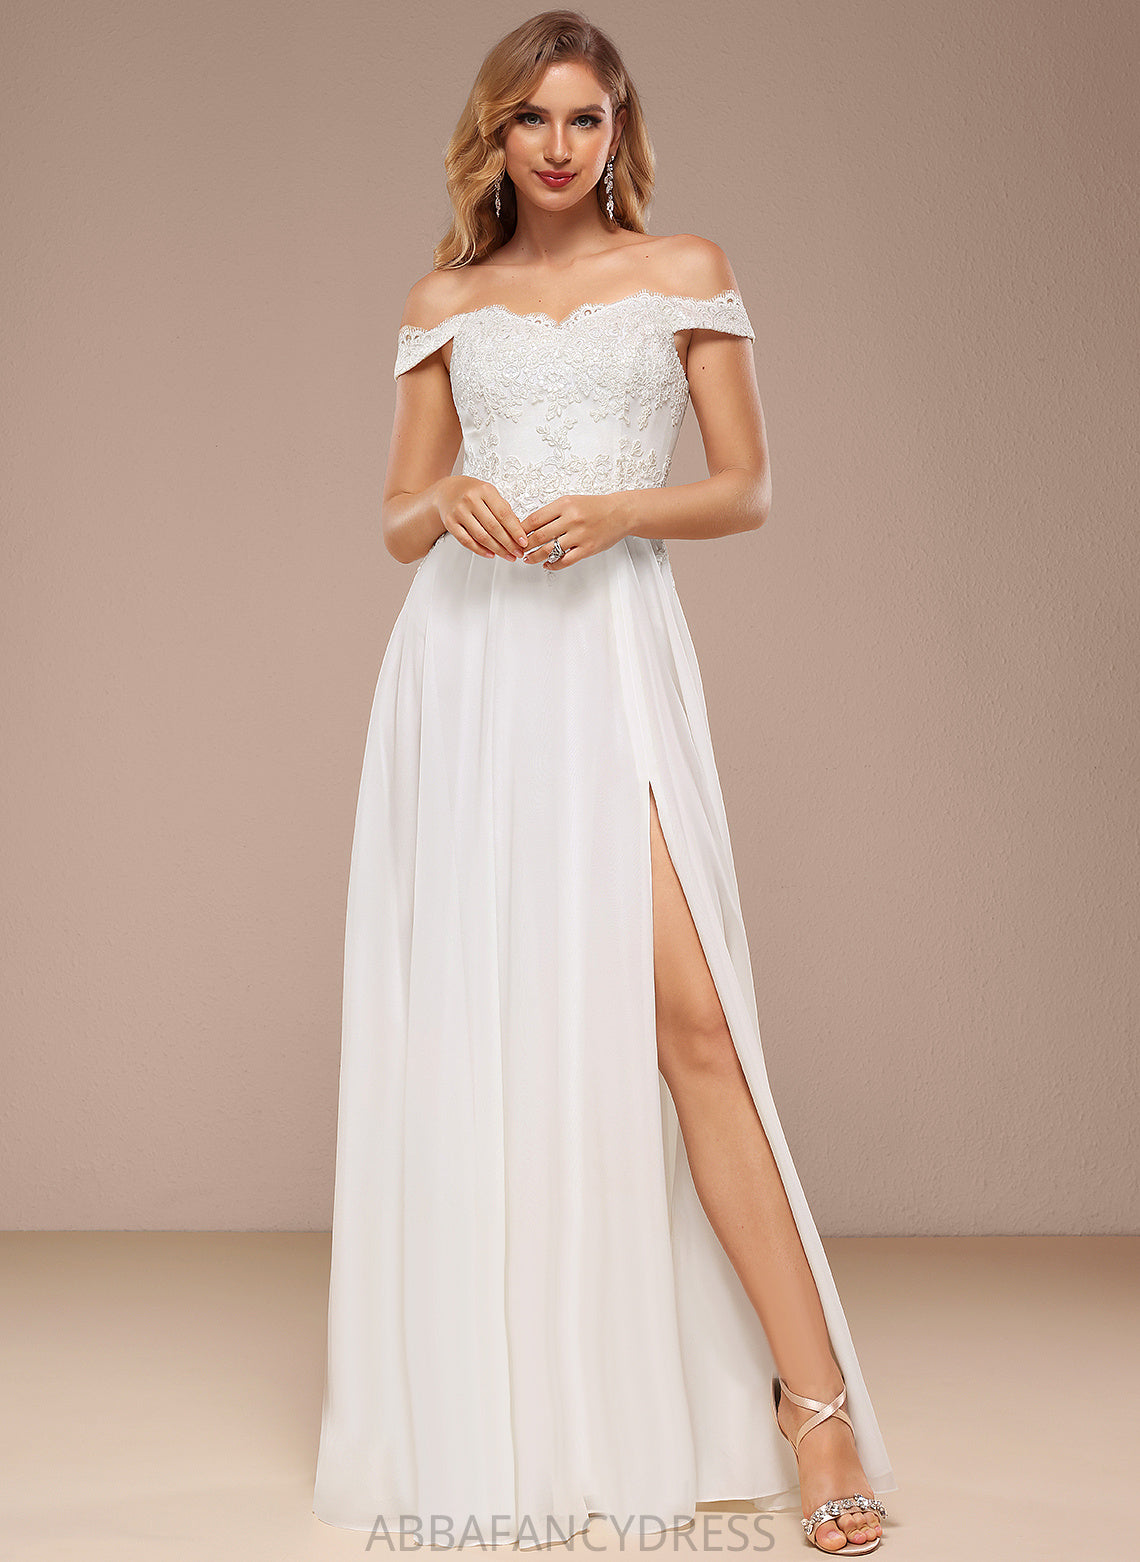 A-Line Wedding Dresses Wedding Dress Off-the-Shoulder With Chiffon Patsy Sequins Lace Floor-Length